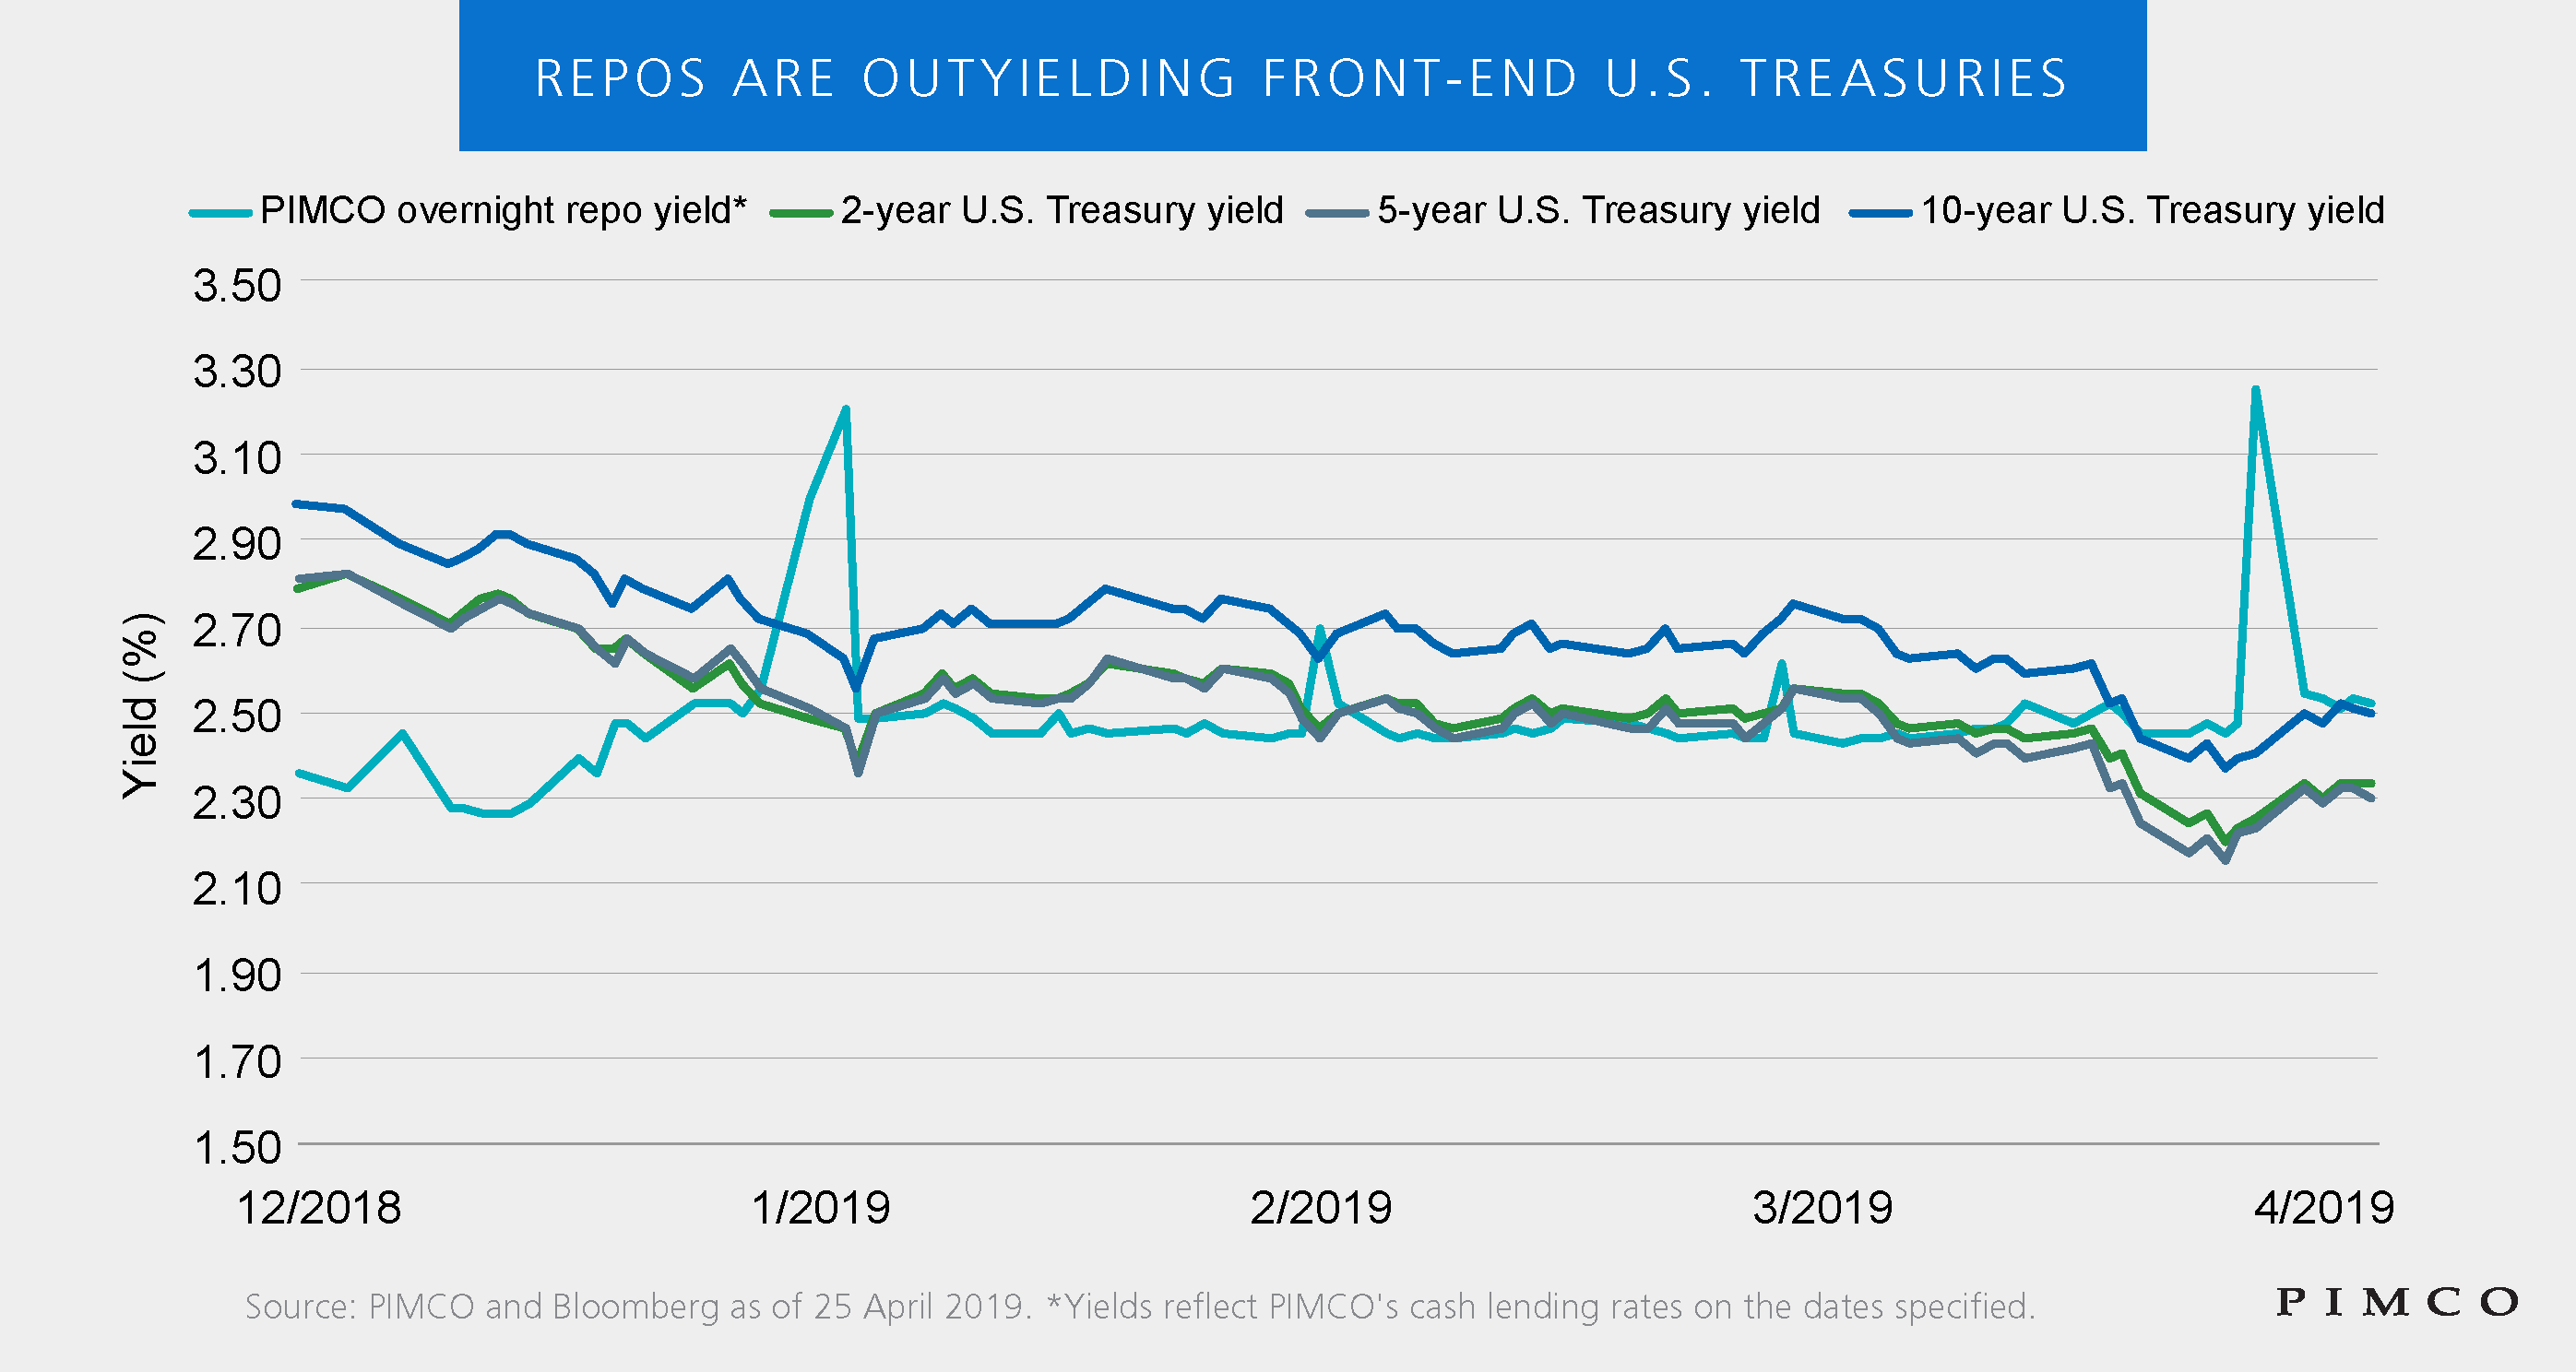 The figure is a line graph of the PIMCO overnight repo yield, along with yields for two-year, five year and 10-year Treasuries, for the period December 2018 to April 2019. The graph shows how repo yields in late March spiked to about 3.25%, before dropping in late April to about 2.5%, about the same as the 10-year Treasury yield, compared with about 2.3% for the five-year and the two-year. Over the five-month period, repo yields usually were the lowest yield, aside when they briefly spiked in January, February and March.